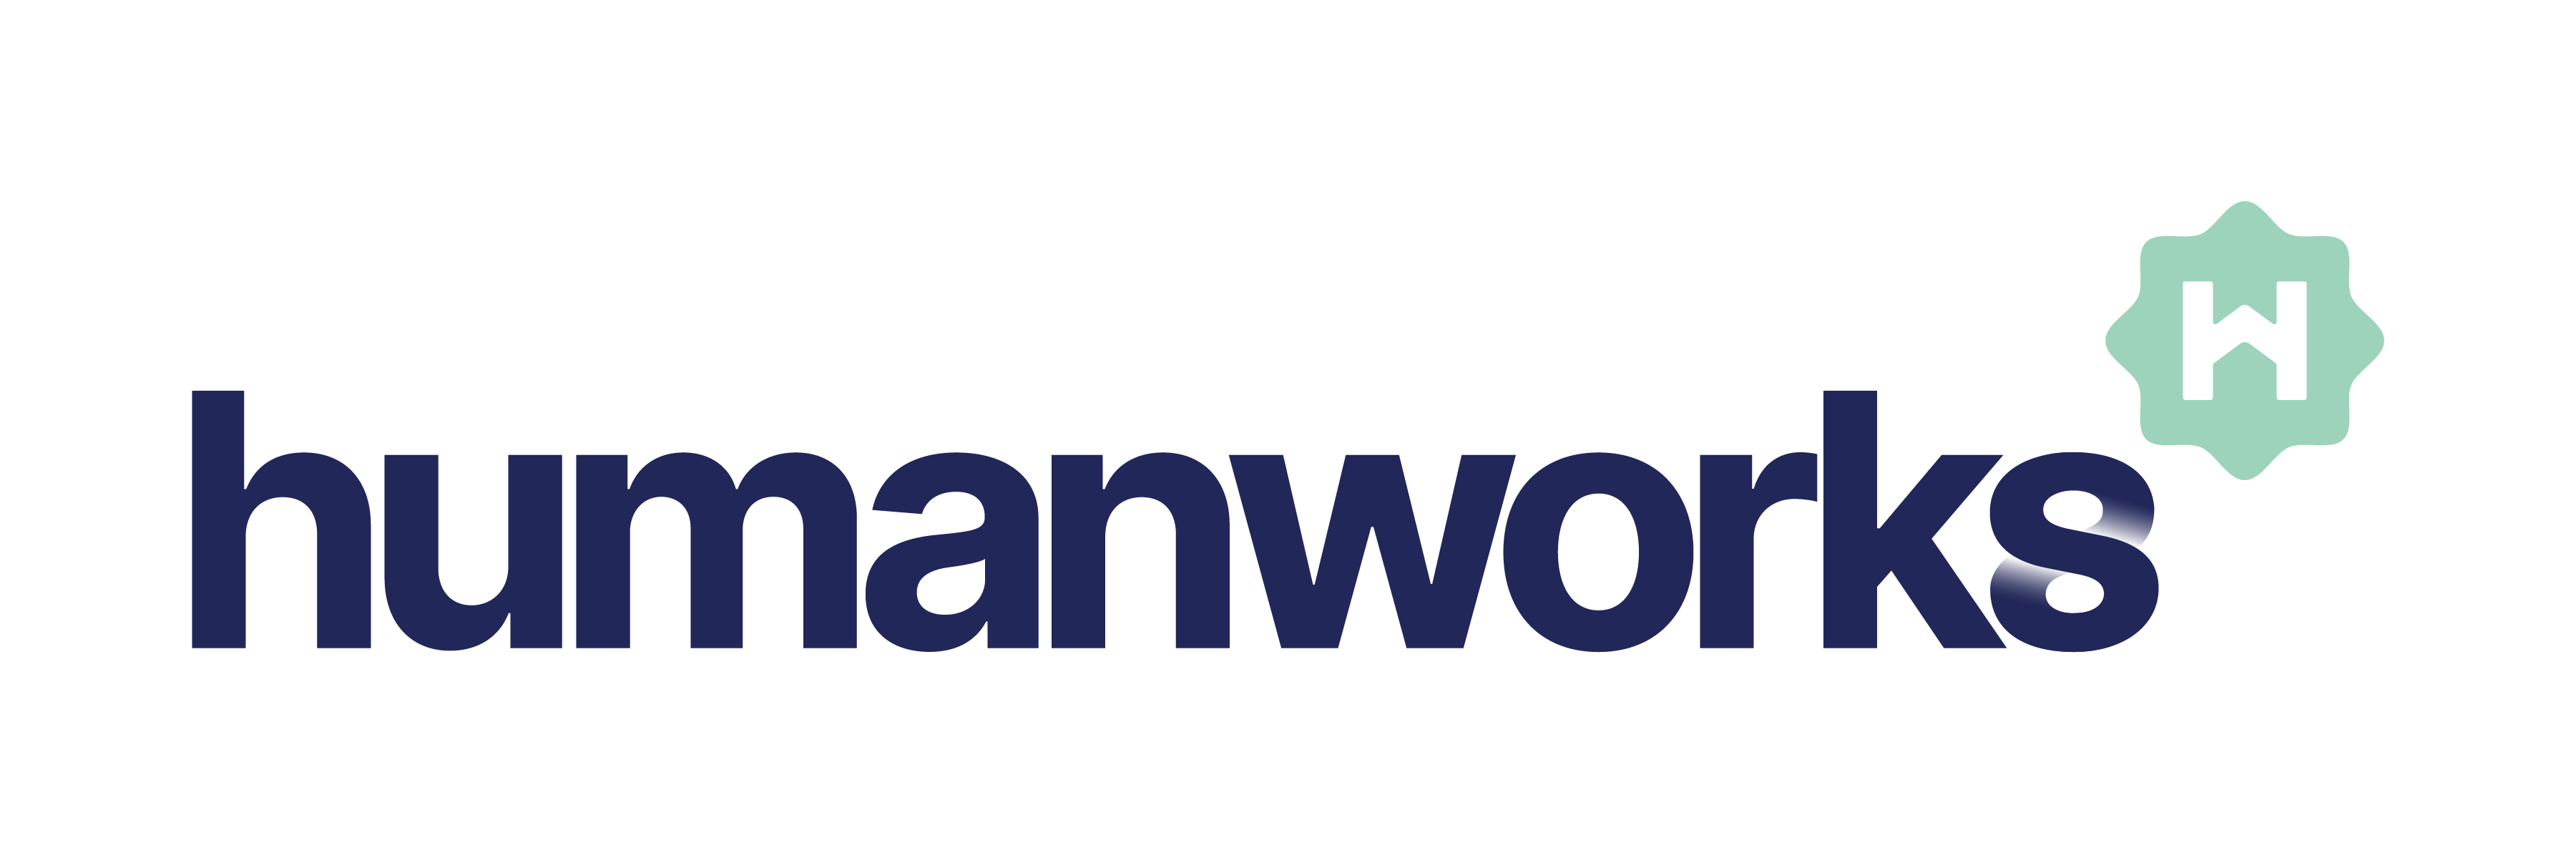 humanworks - Advancing and Attracting Talent